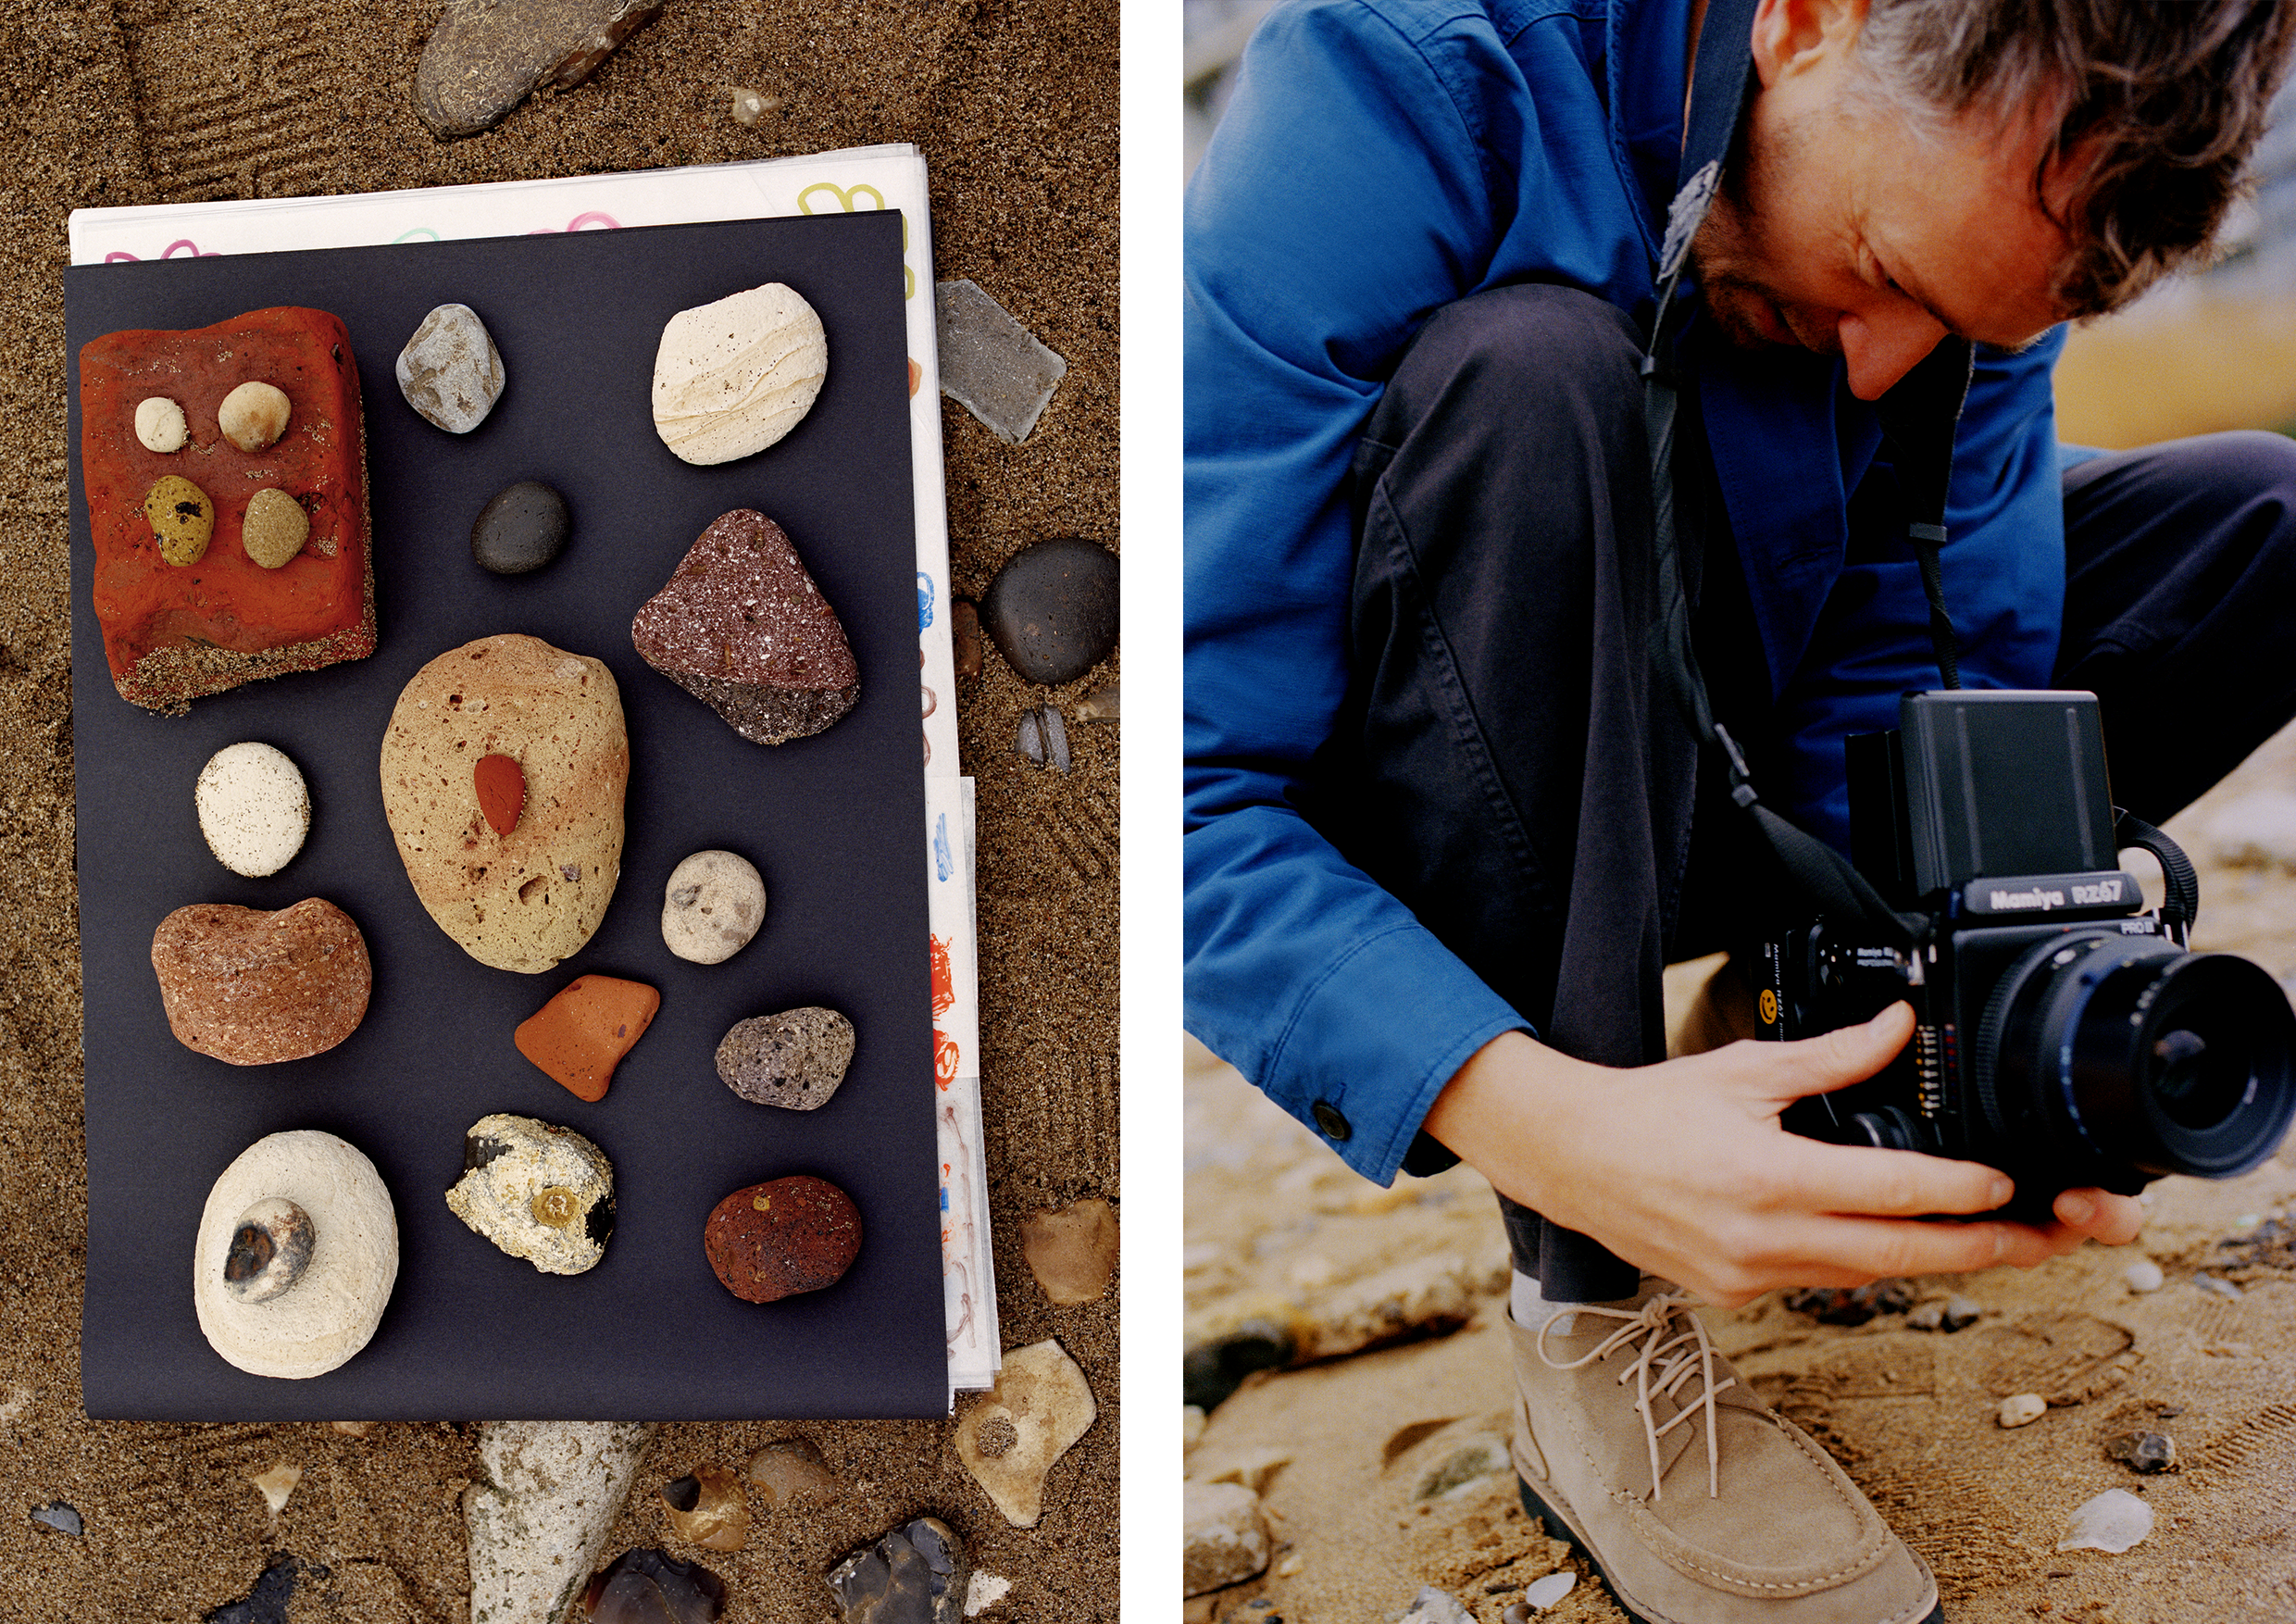 Stones laid out on a beach; man in blue shirt taking photographs